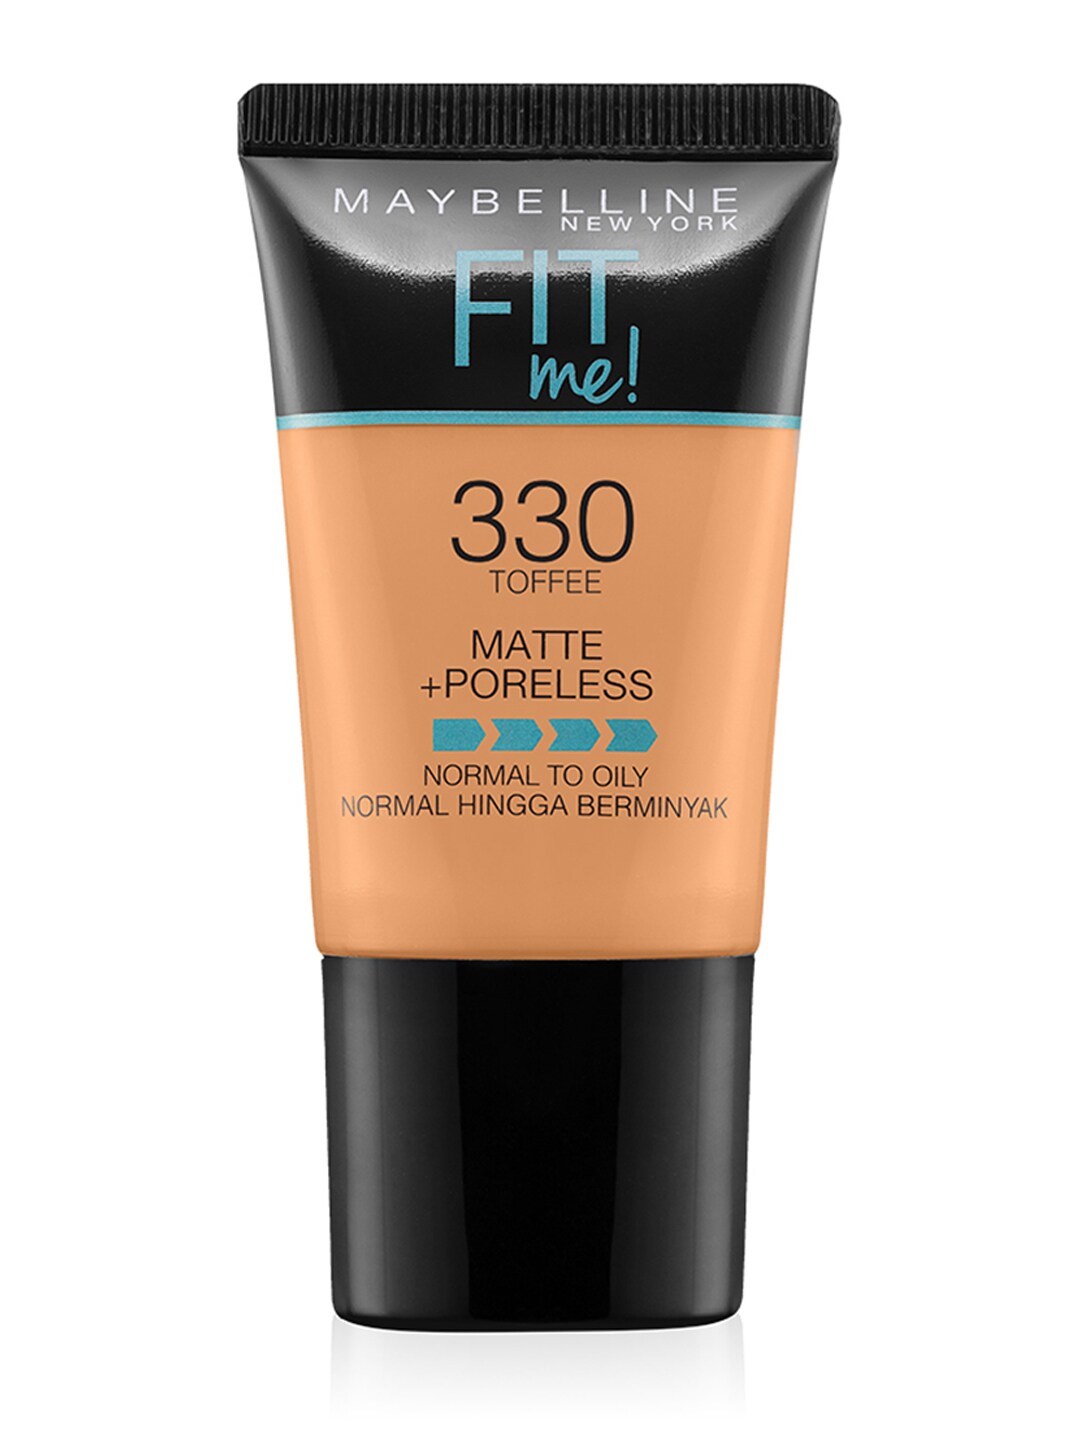 Maybelline New York Fit Me Matte + Poreless Liquid Foundation Tube 18 ml - Toffee 330 Price in India